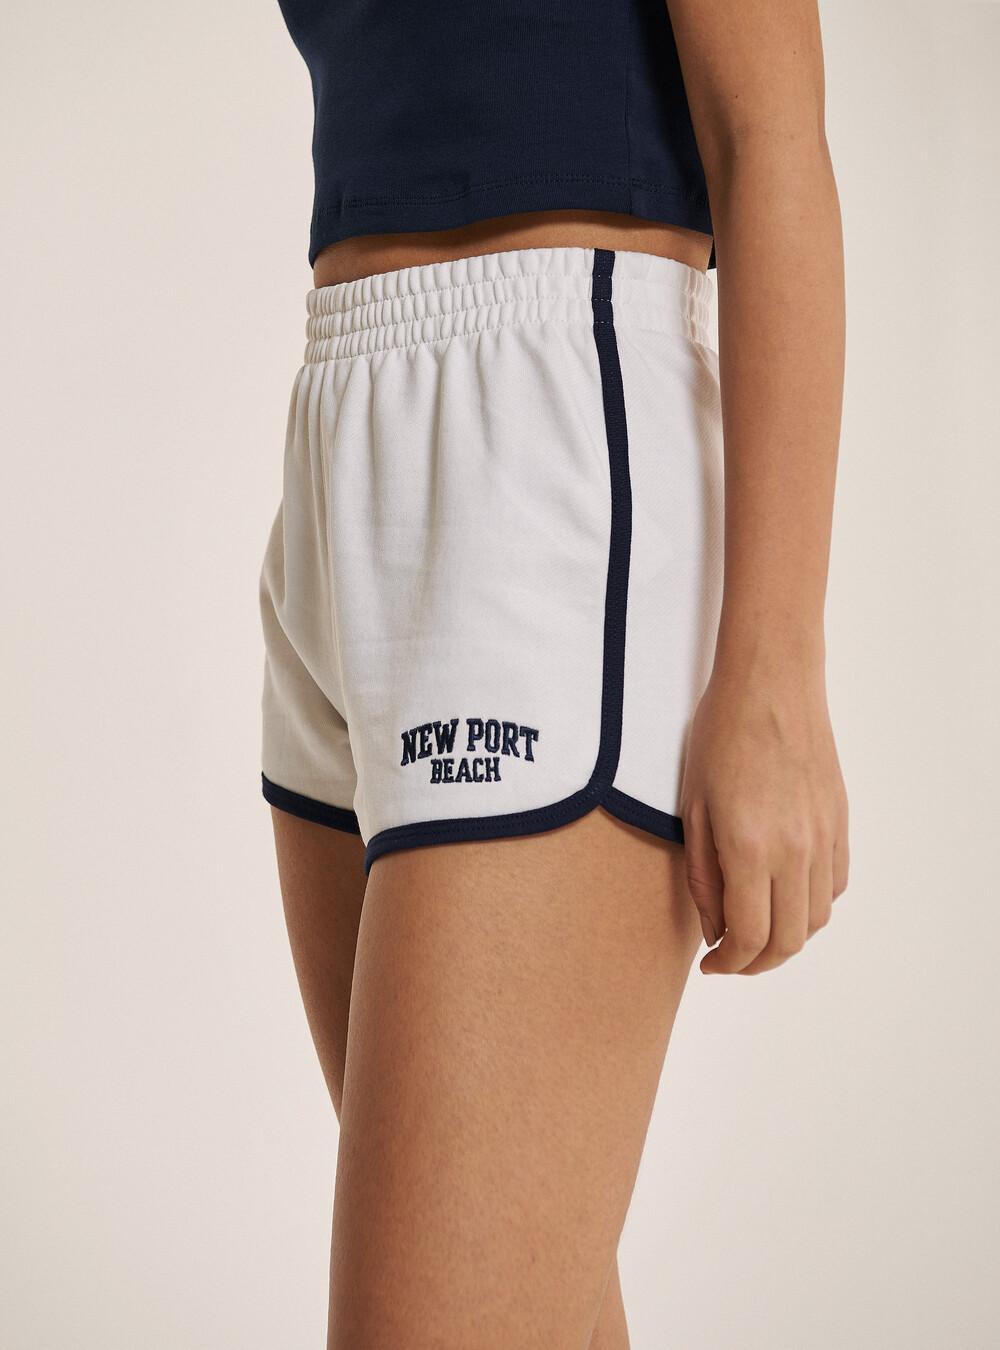 100% cotton fleece shorts with contrasting embroidery and piping